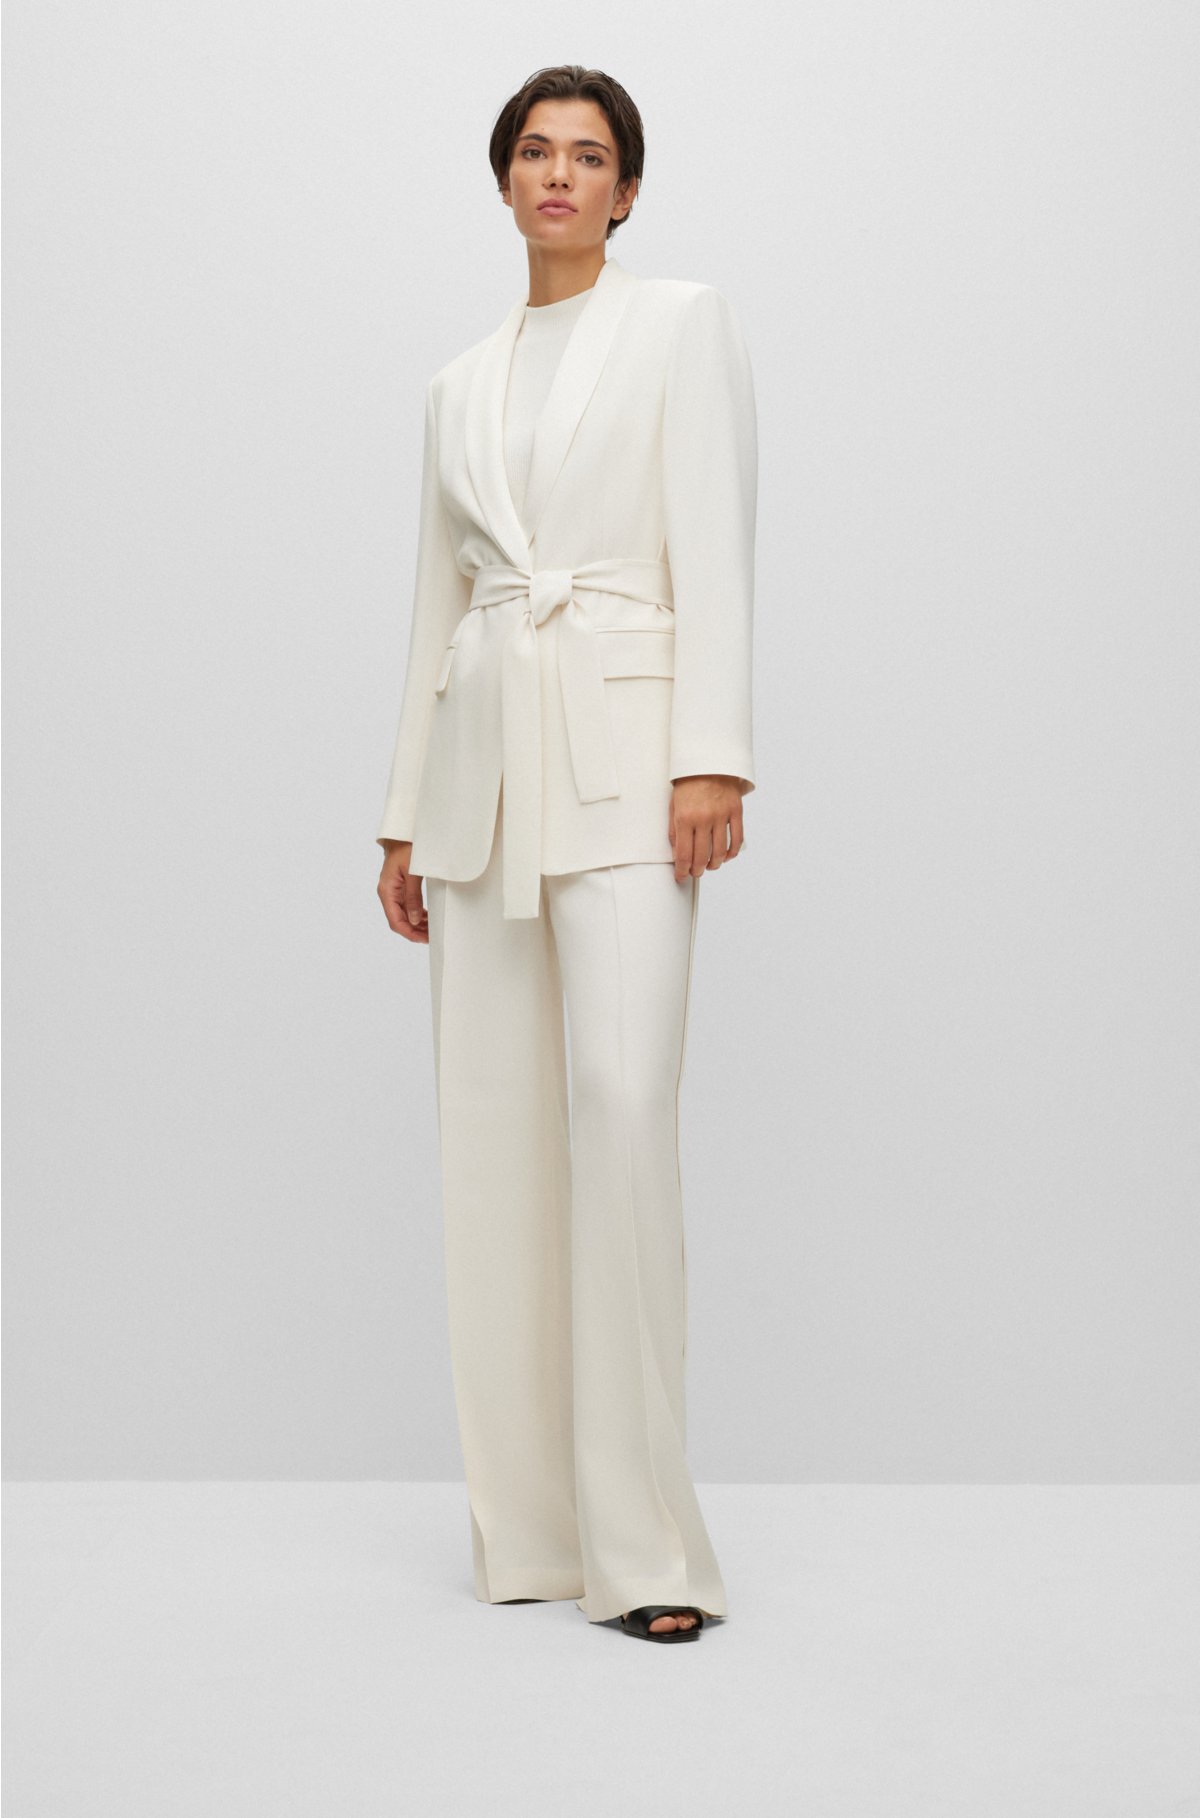 Oversized-fit jacket with tie belt and silken trims, White